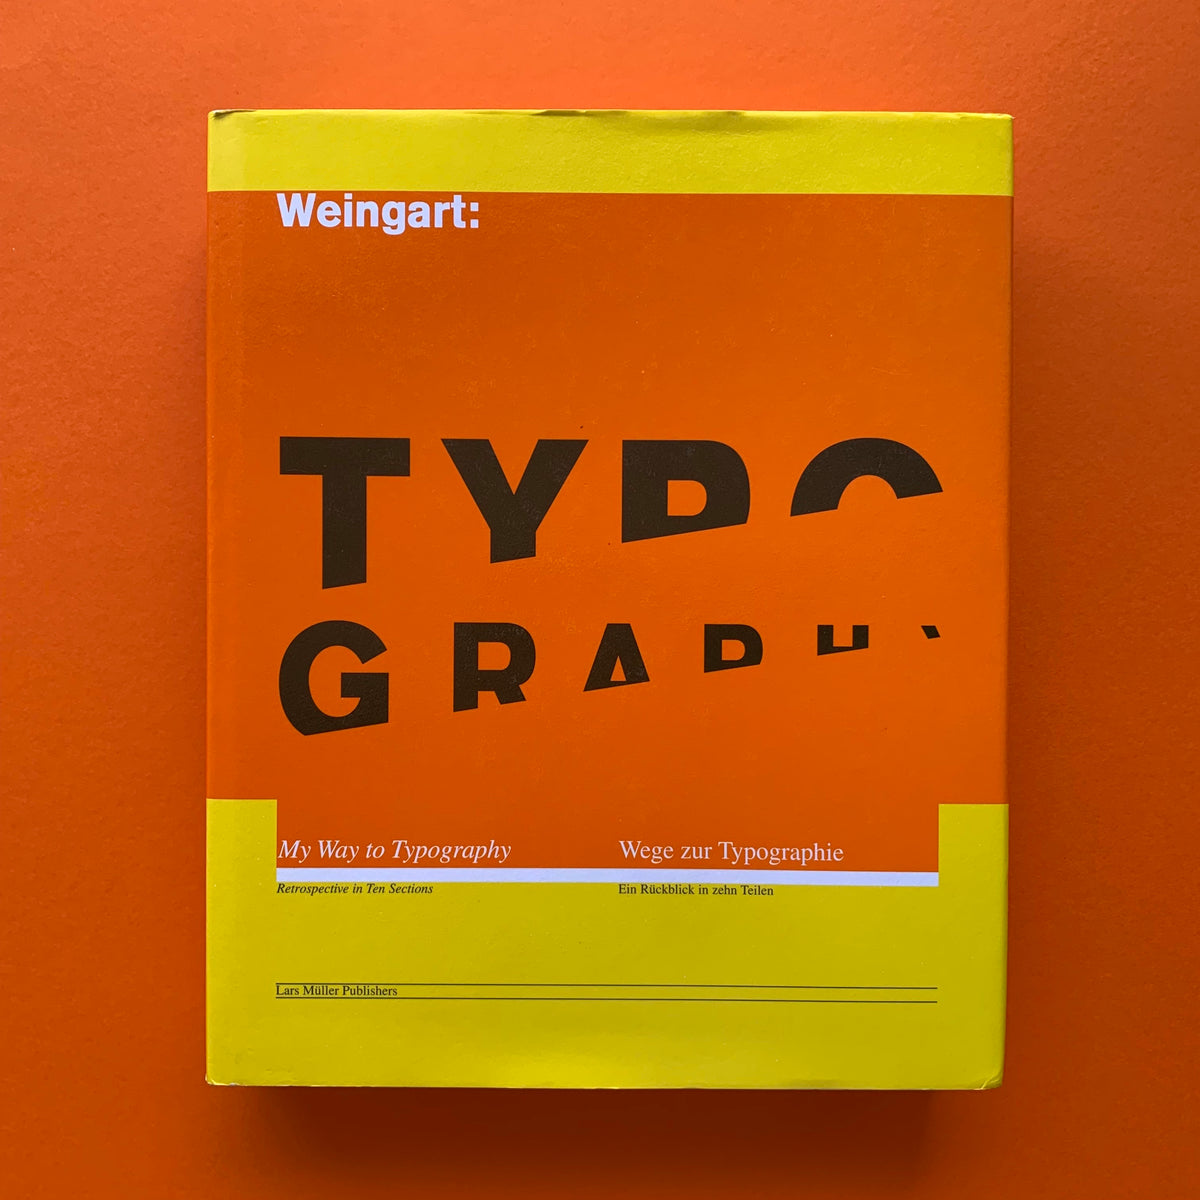 Wolfgang Weingart: My Way to Typography (Lars Müller) – The Print 